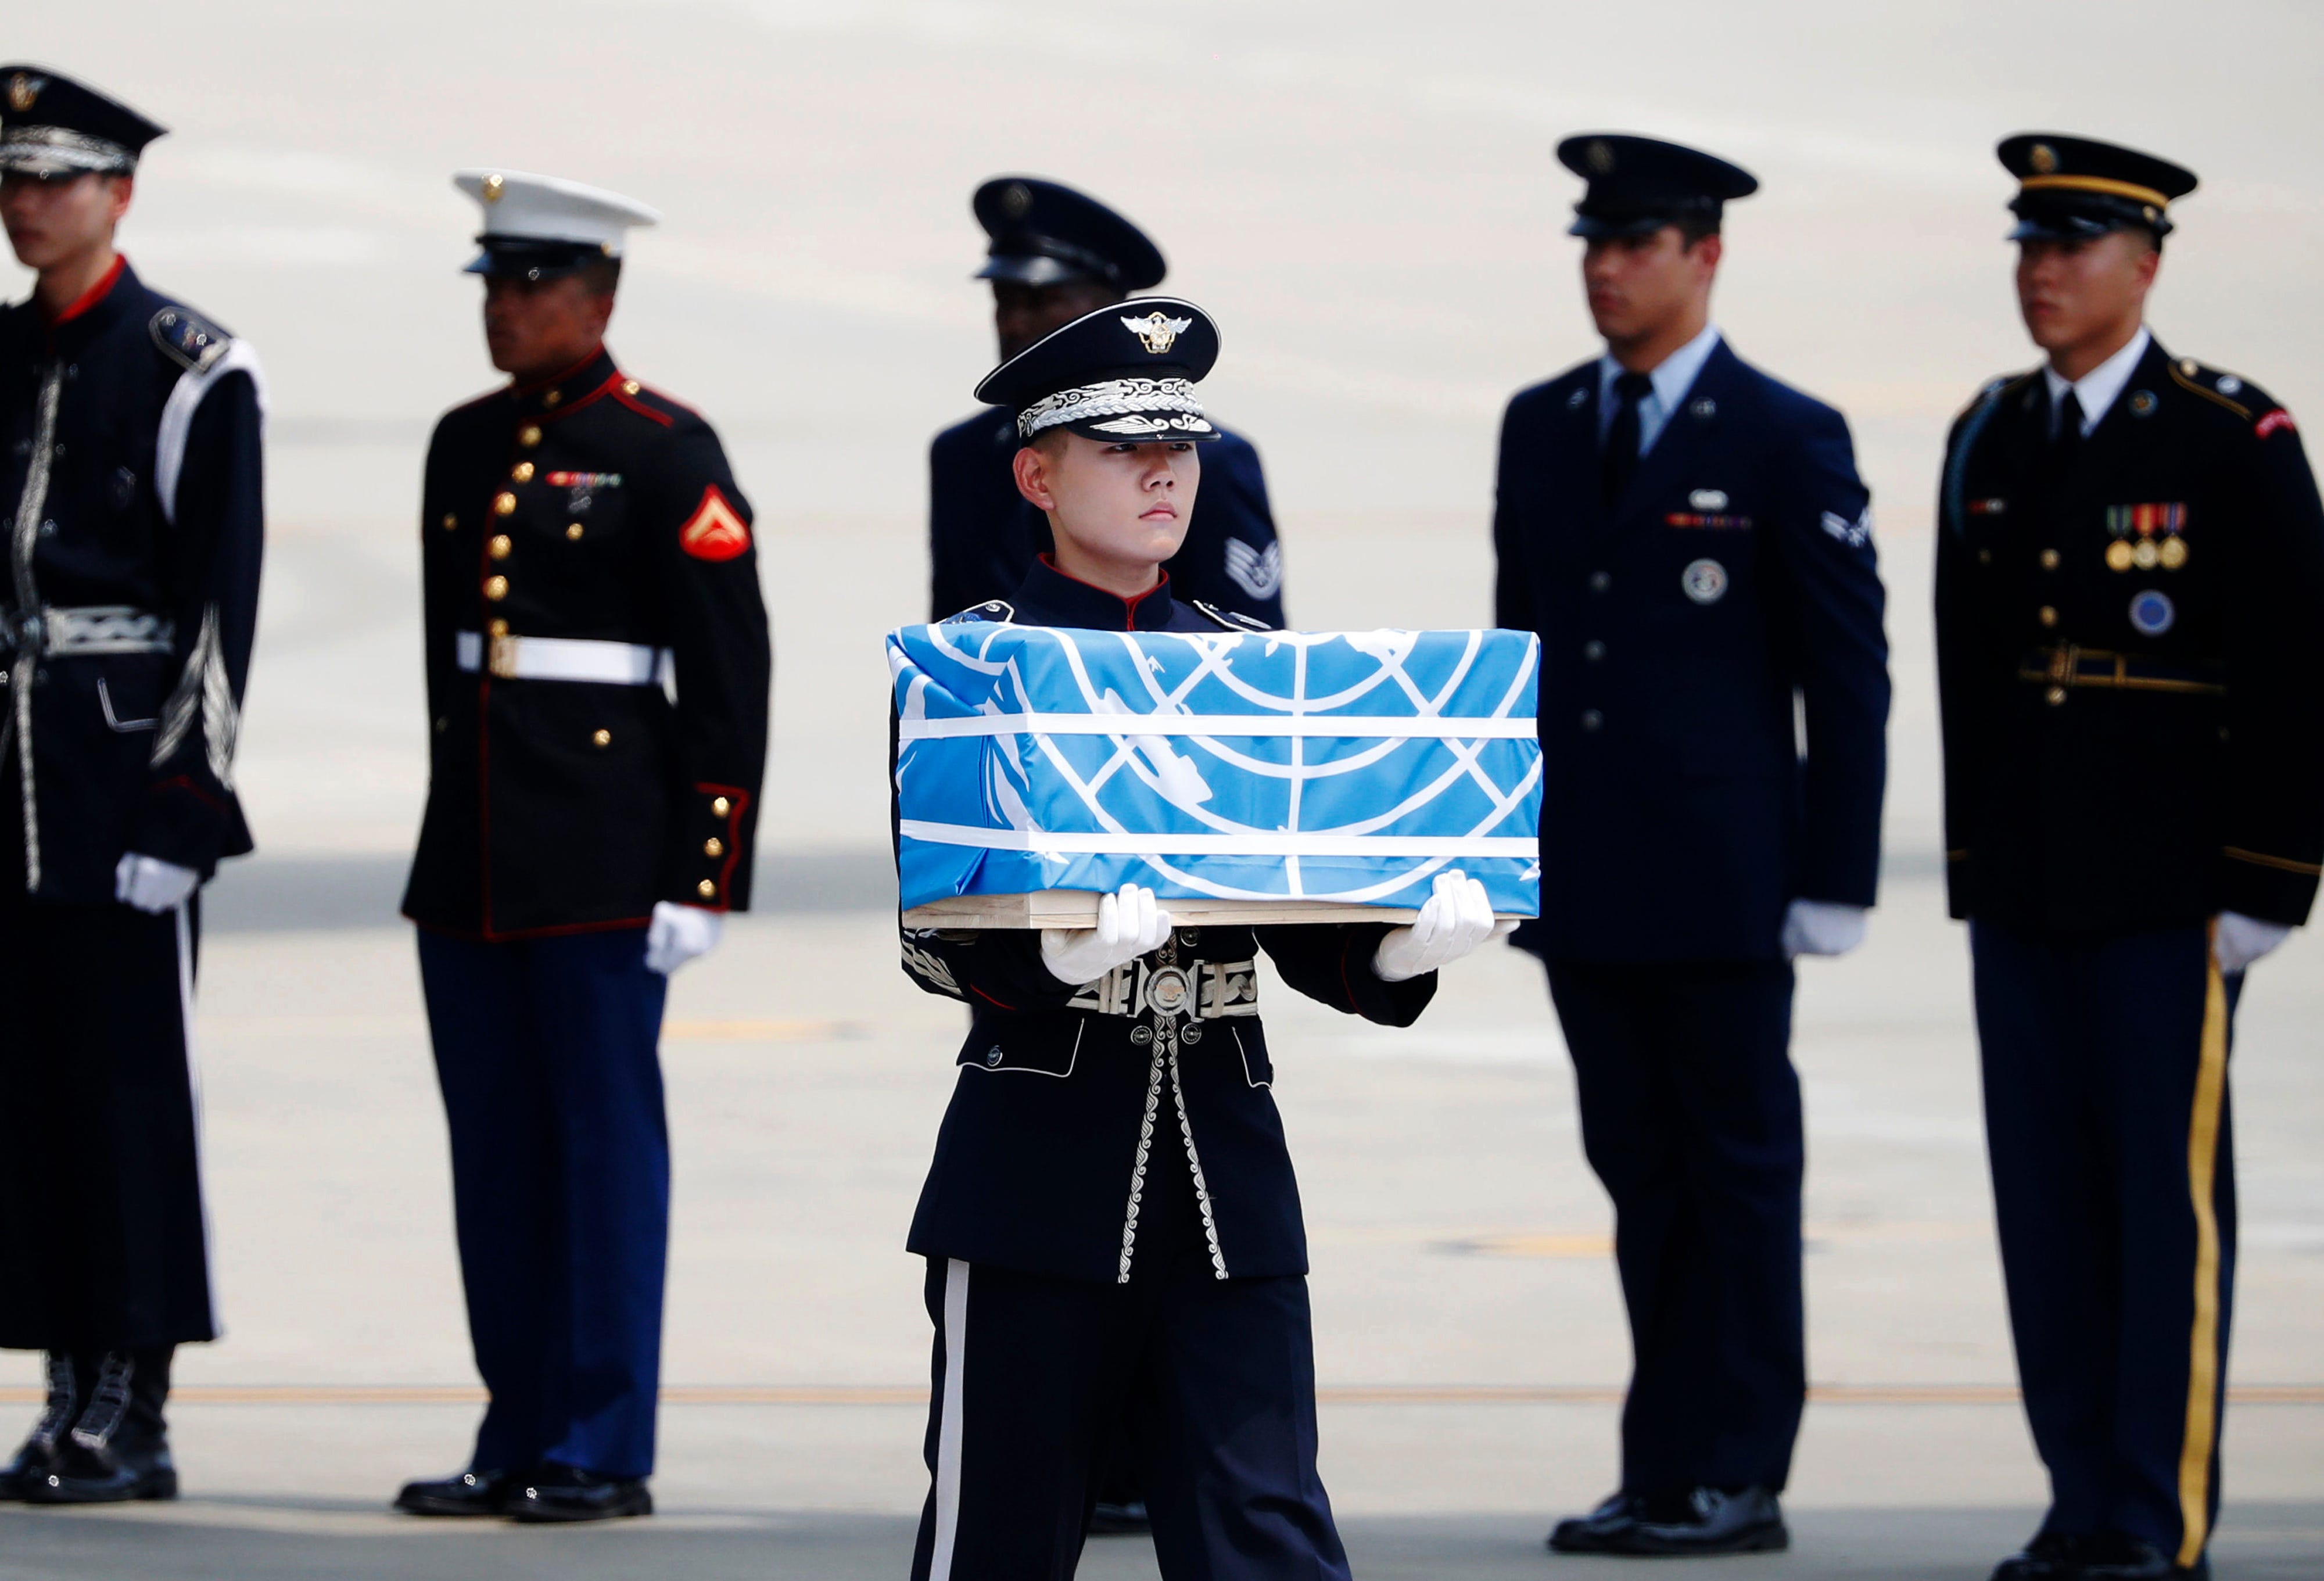 A soldier carries a casket containing a remain of a U.S. soldier who was killed in the Korean War during a ceremony at Osan Air Base in Pyeongtaek, South Korea, on July 27, 2018.  The U.N. Command said the 55 cases of war remains retrieved from North